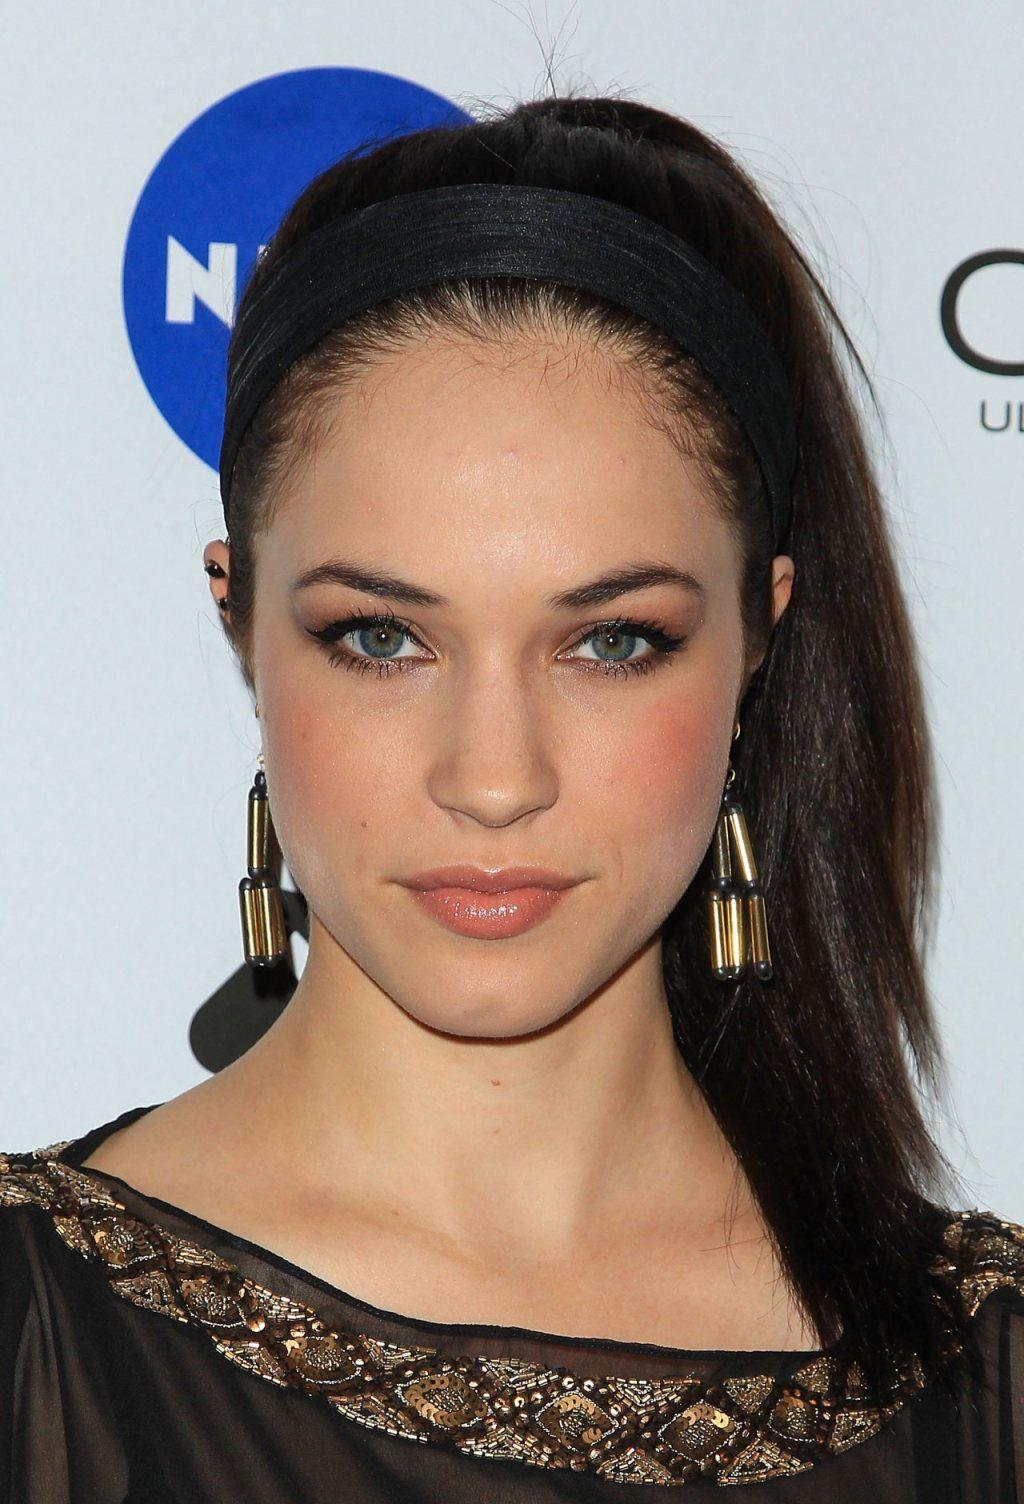 Alexis Knapp pitch perfect (Stacy) say I look just like her